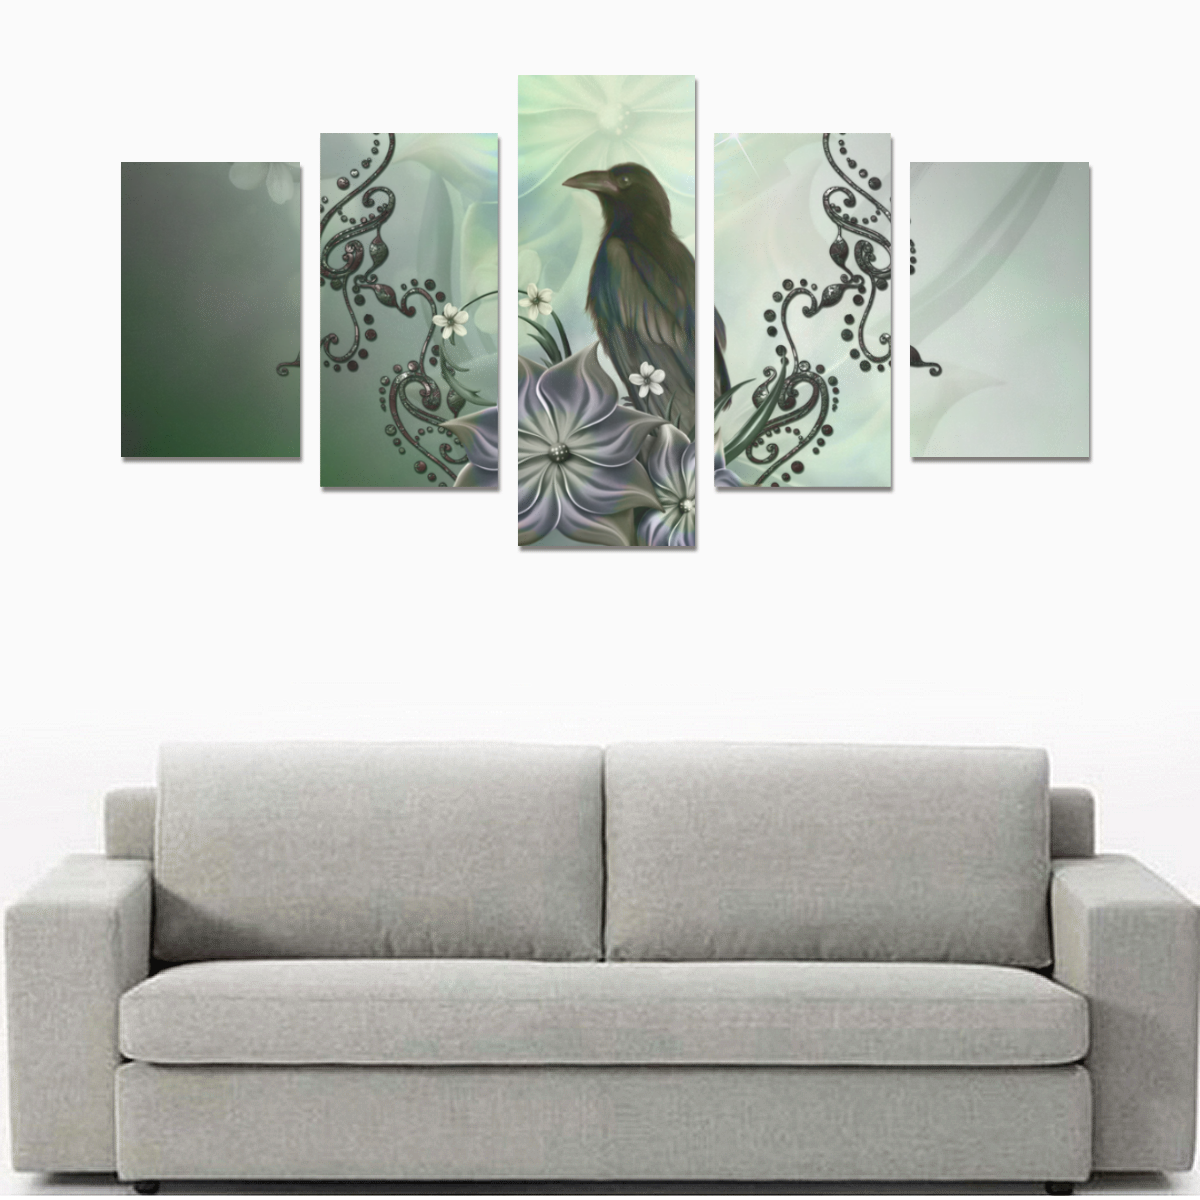 Raven with flowers Canvas Print Sets C (No Frame)